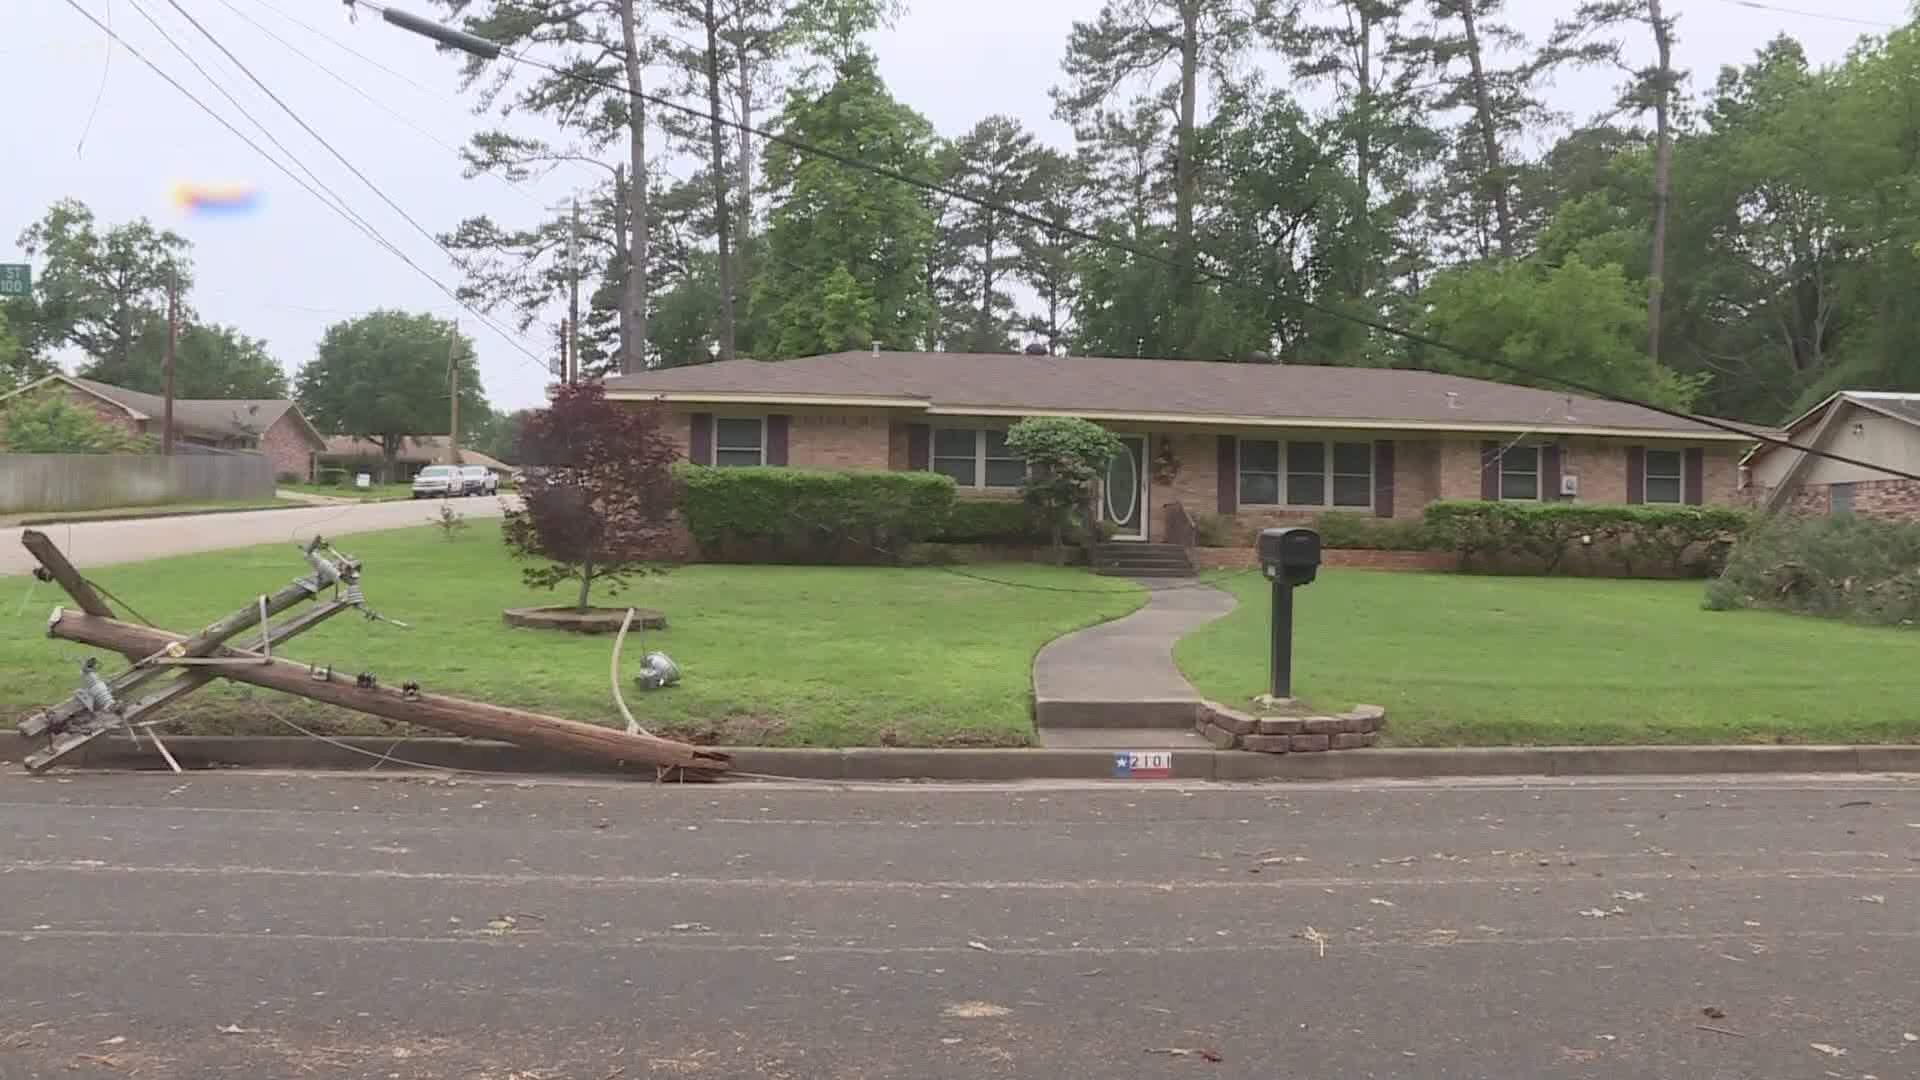 It was unknown Wednesday if the city of Longview will challenge the rate increase.